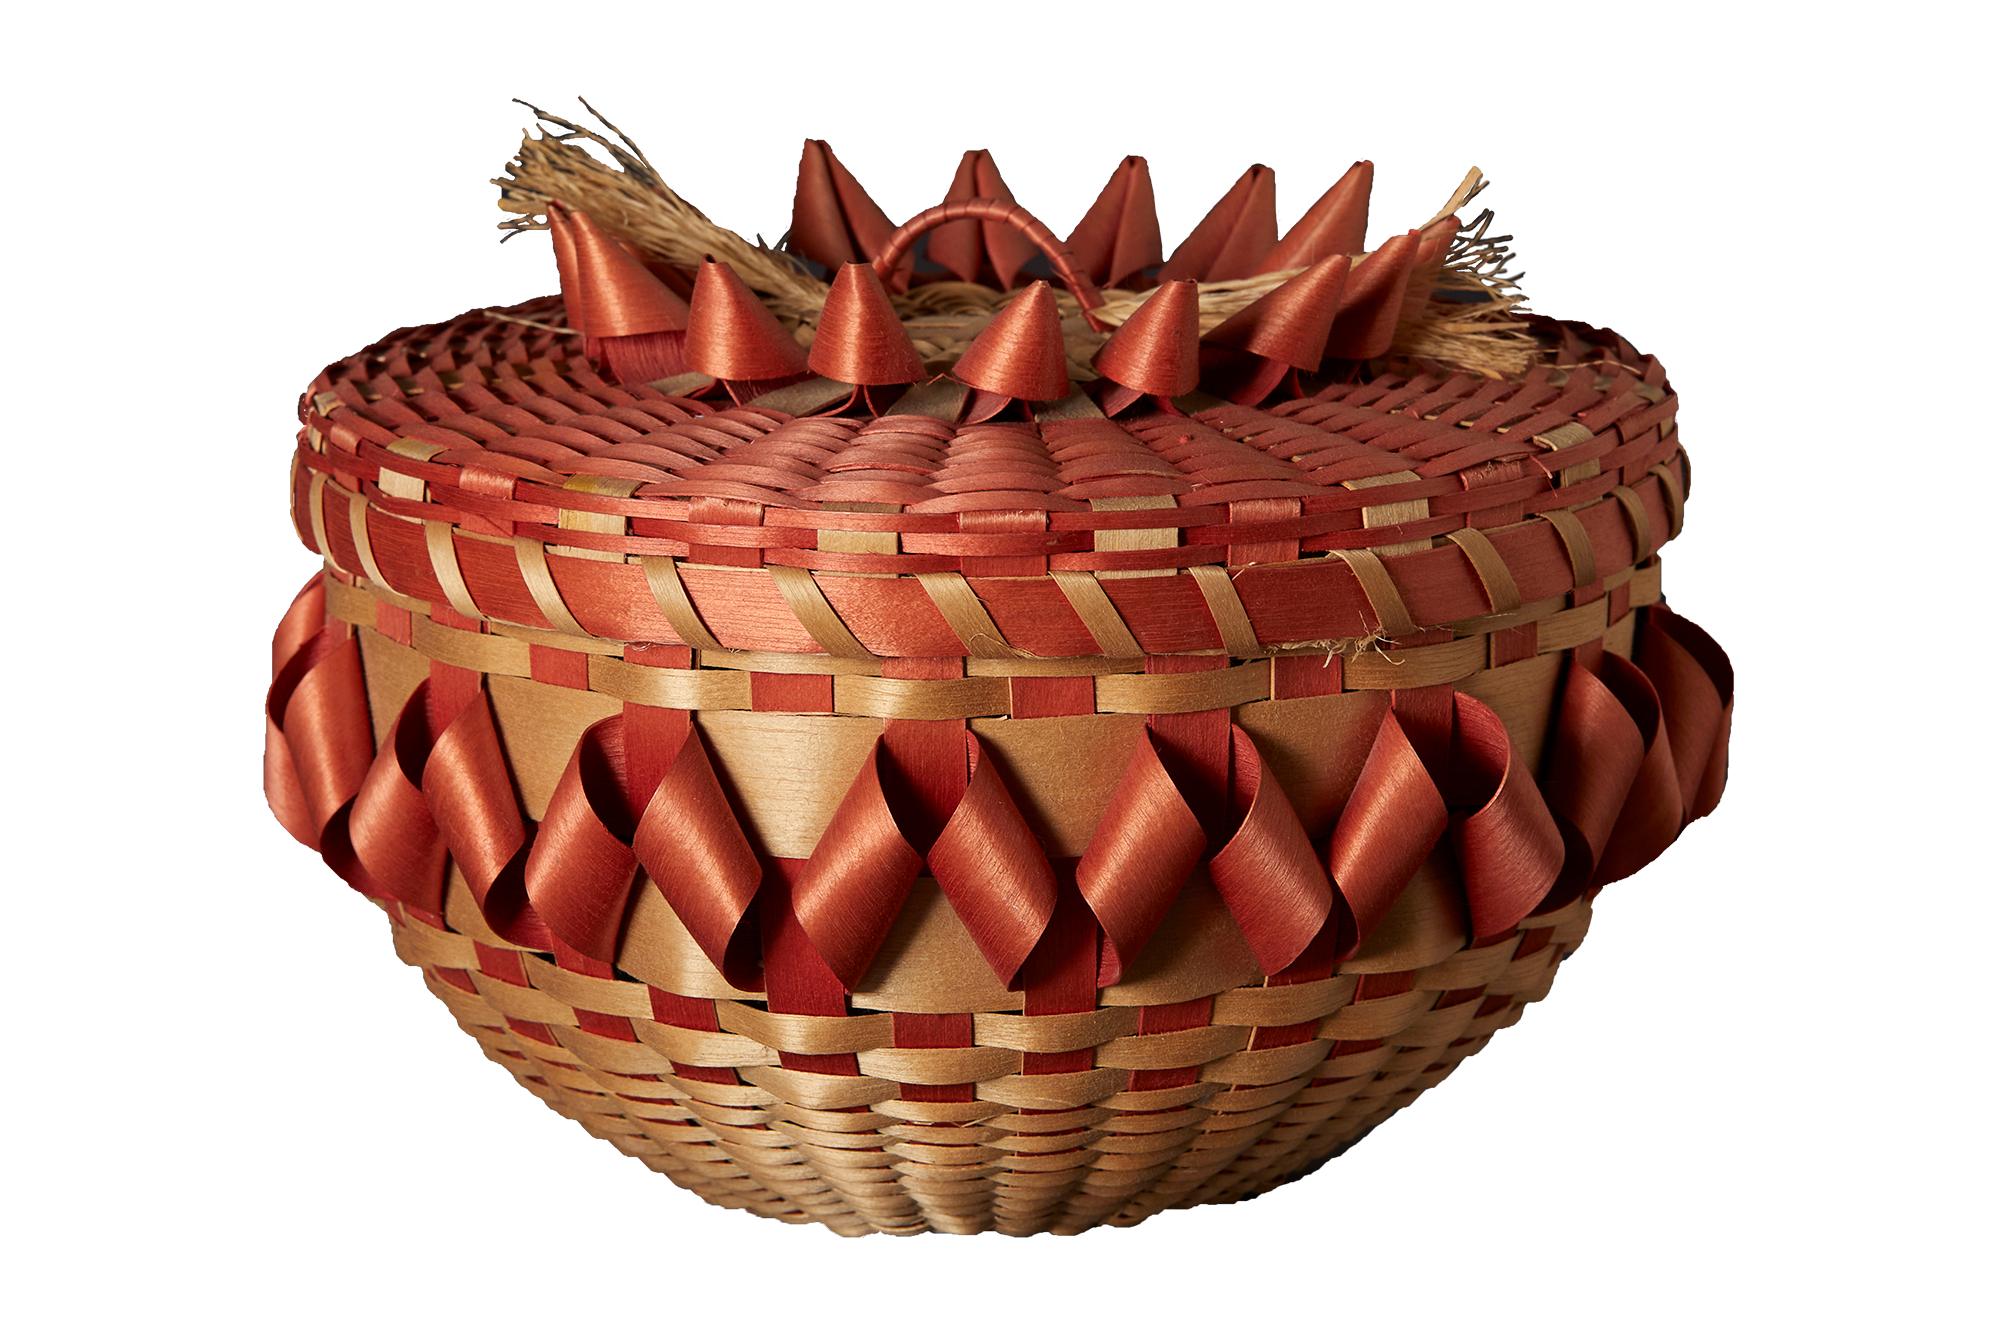 A woven tan and red basket.